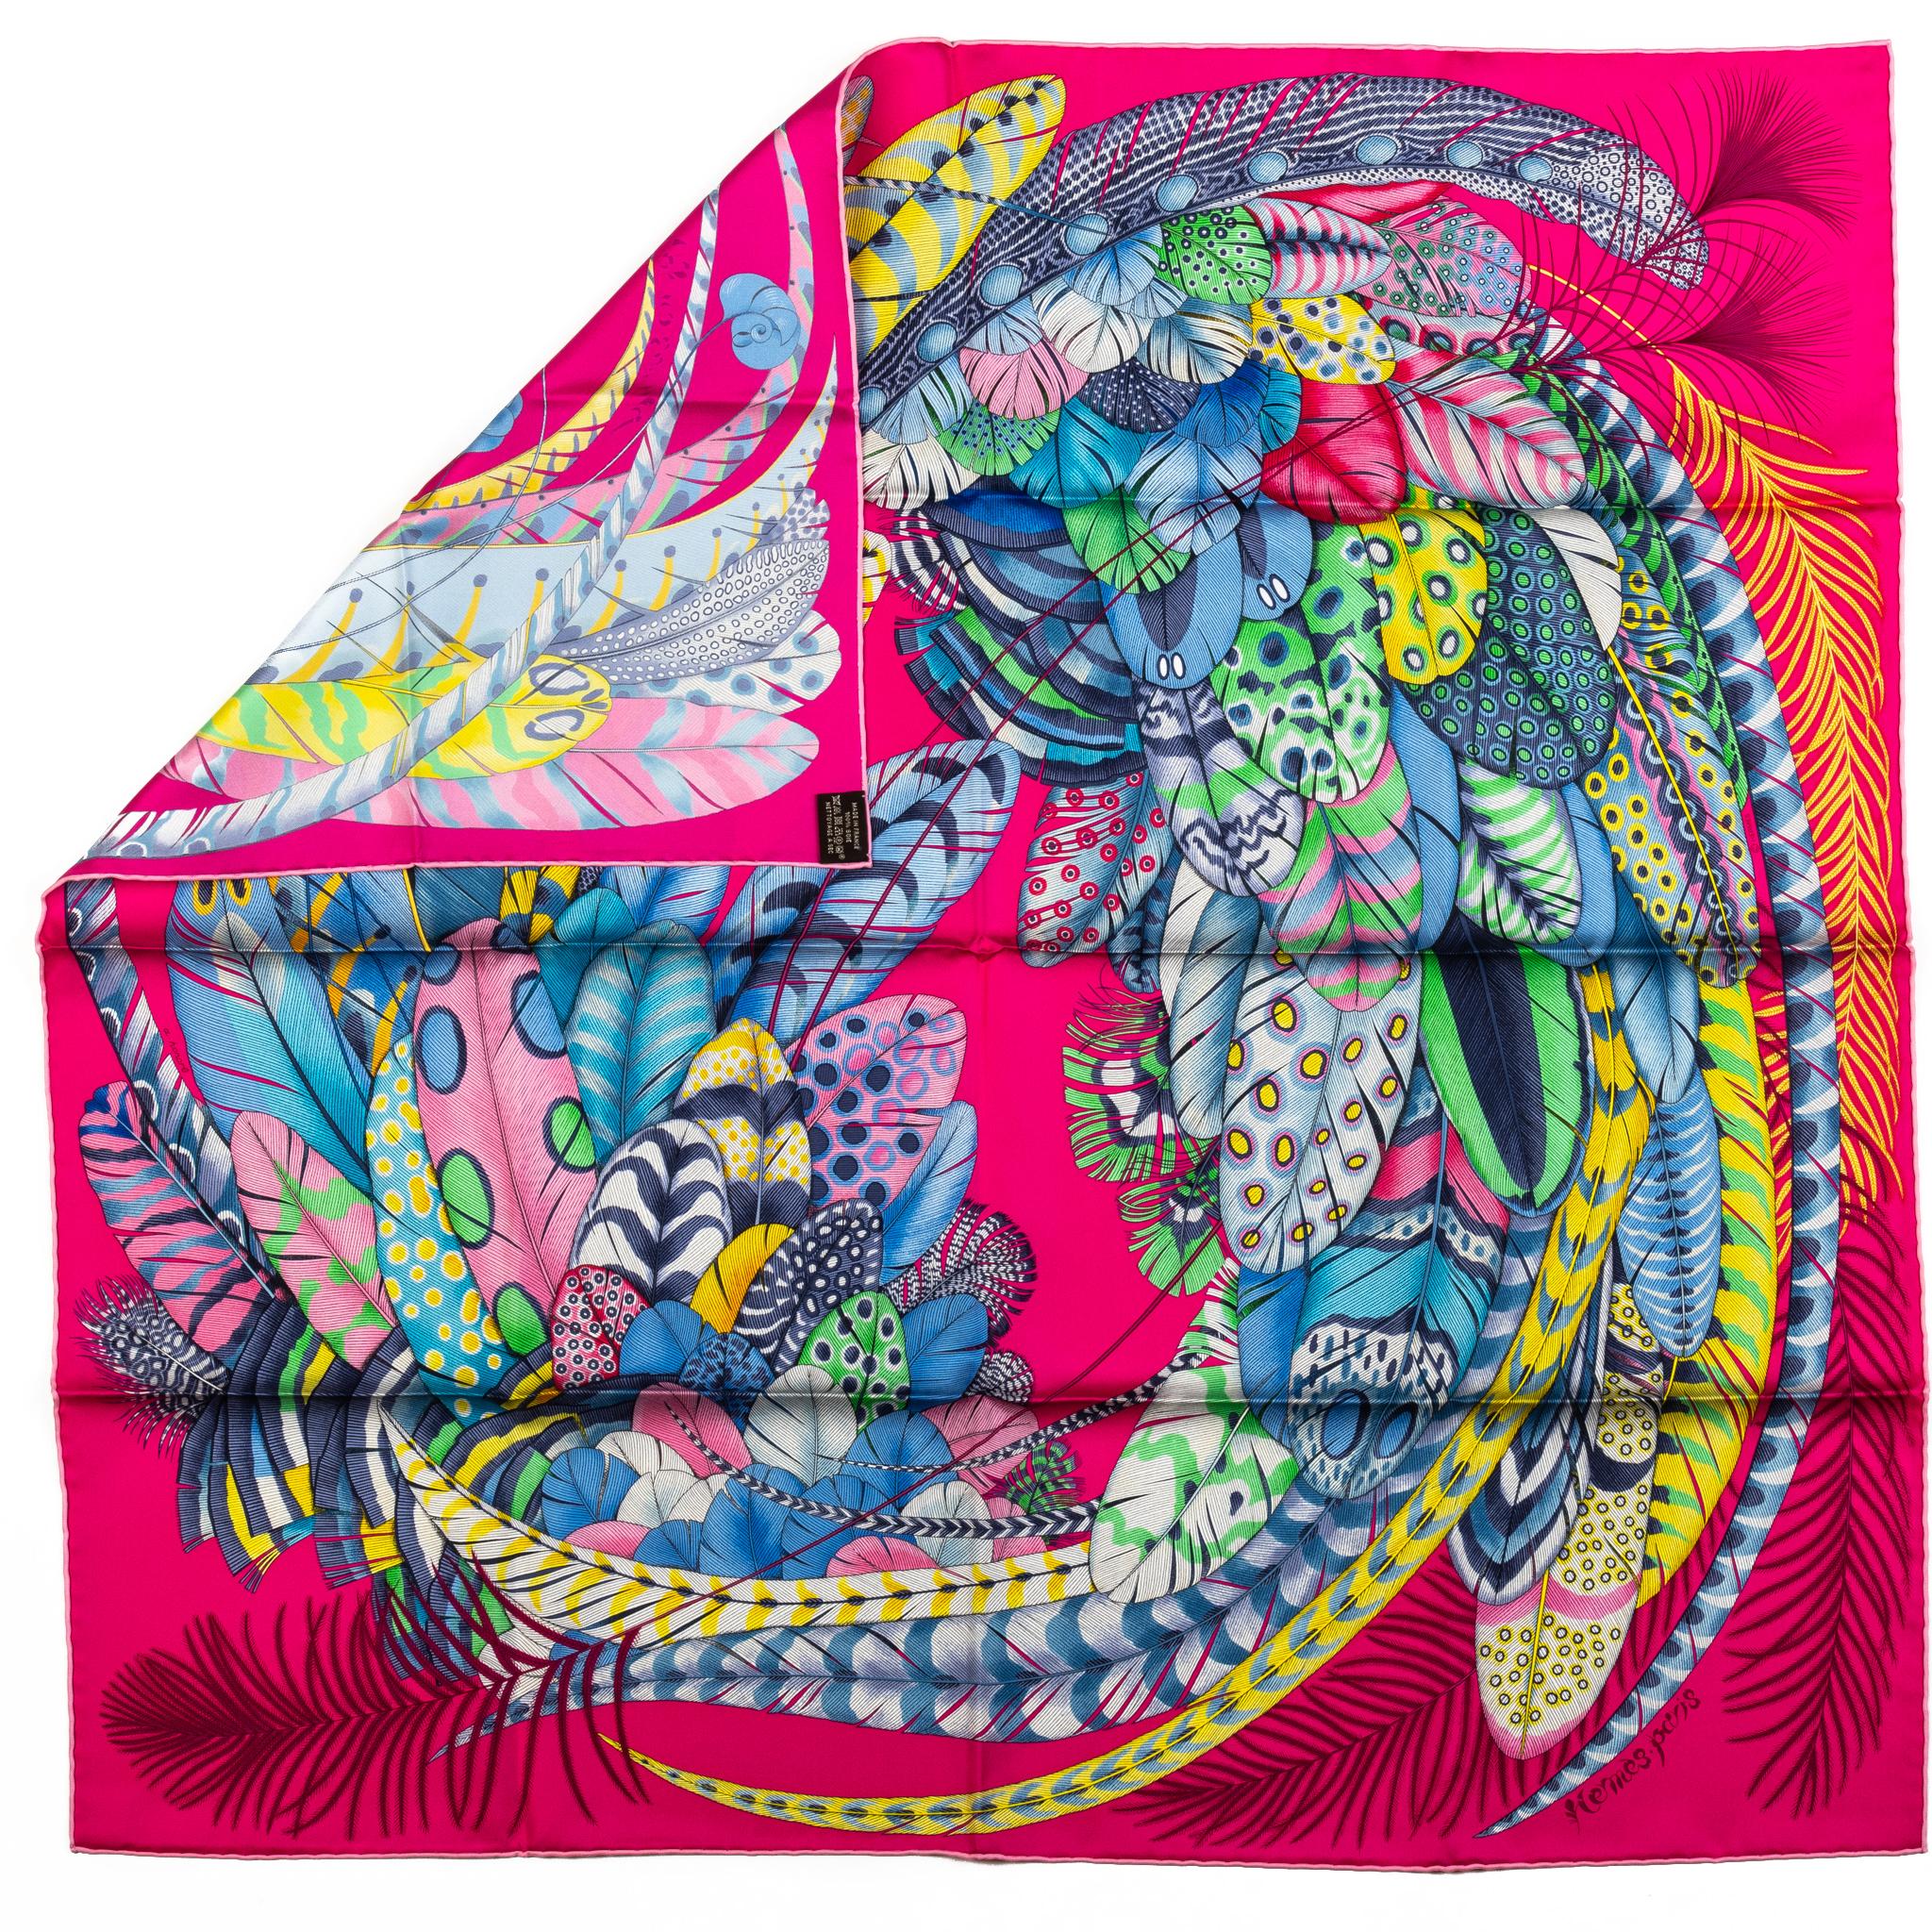 Hermès collectible fuchsia feathers silk scarf. Hand-rolled edges. New in box.
